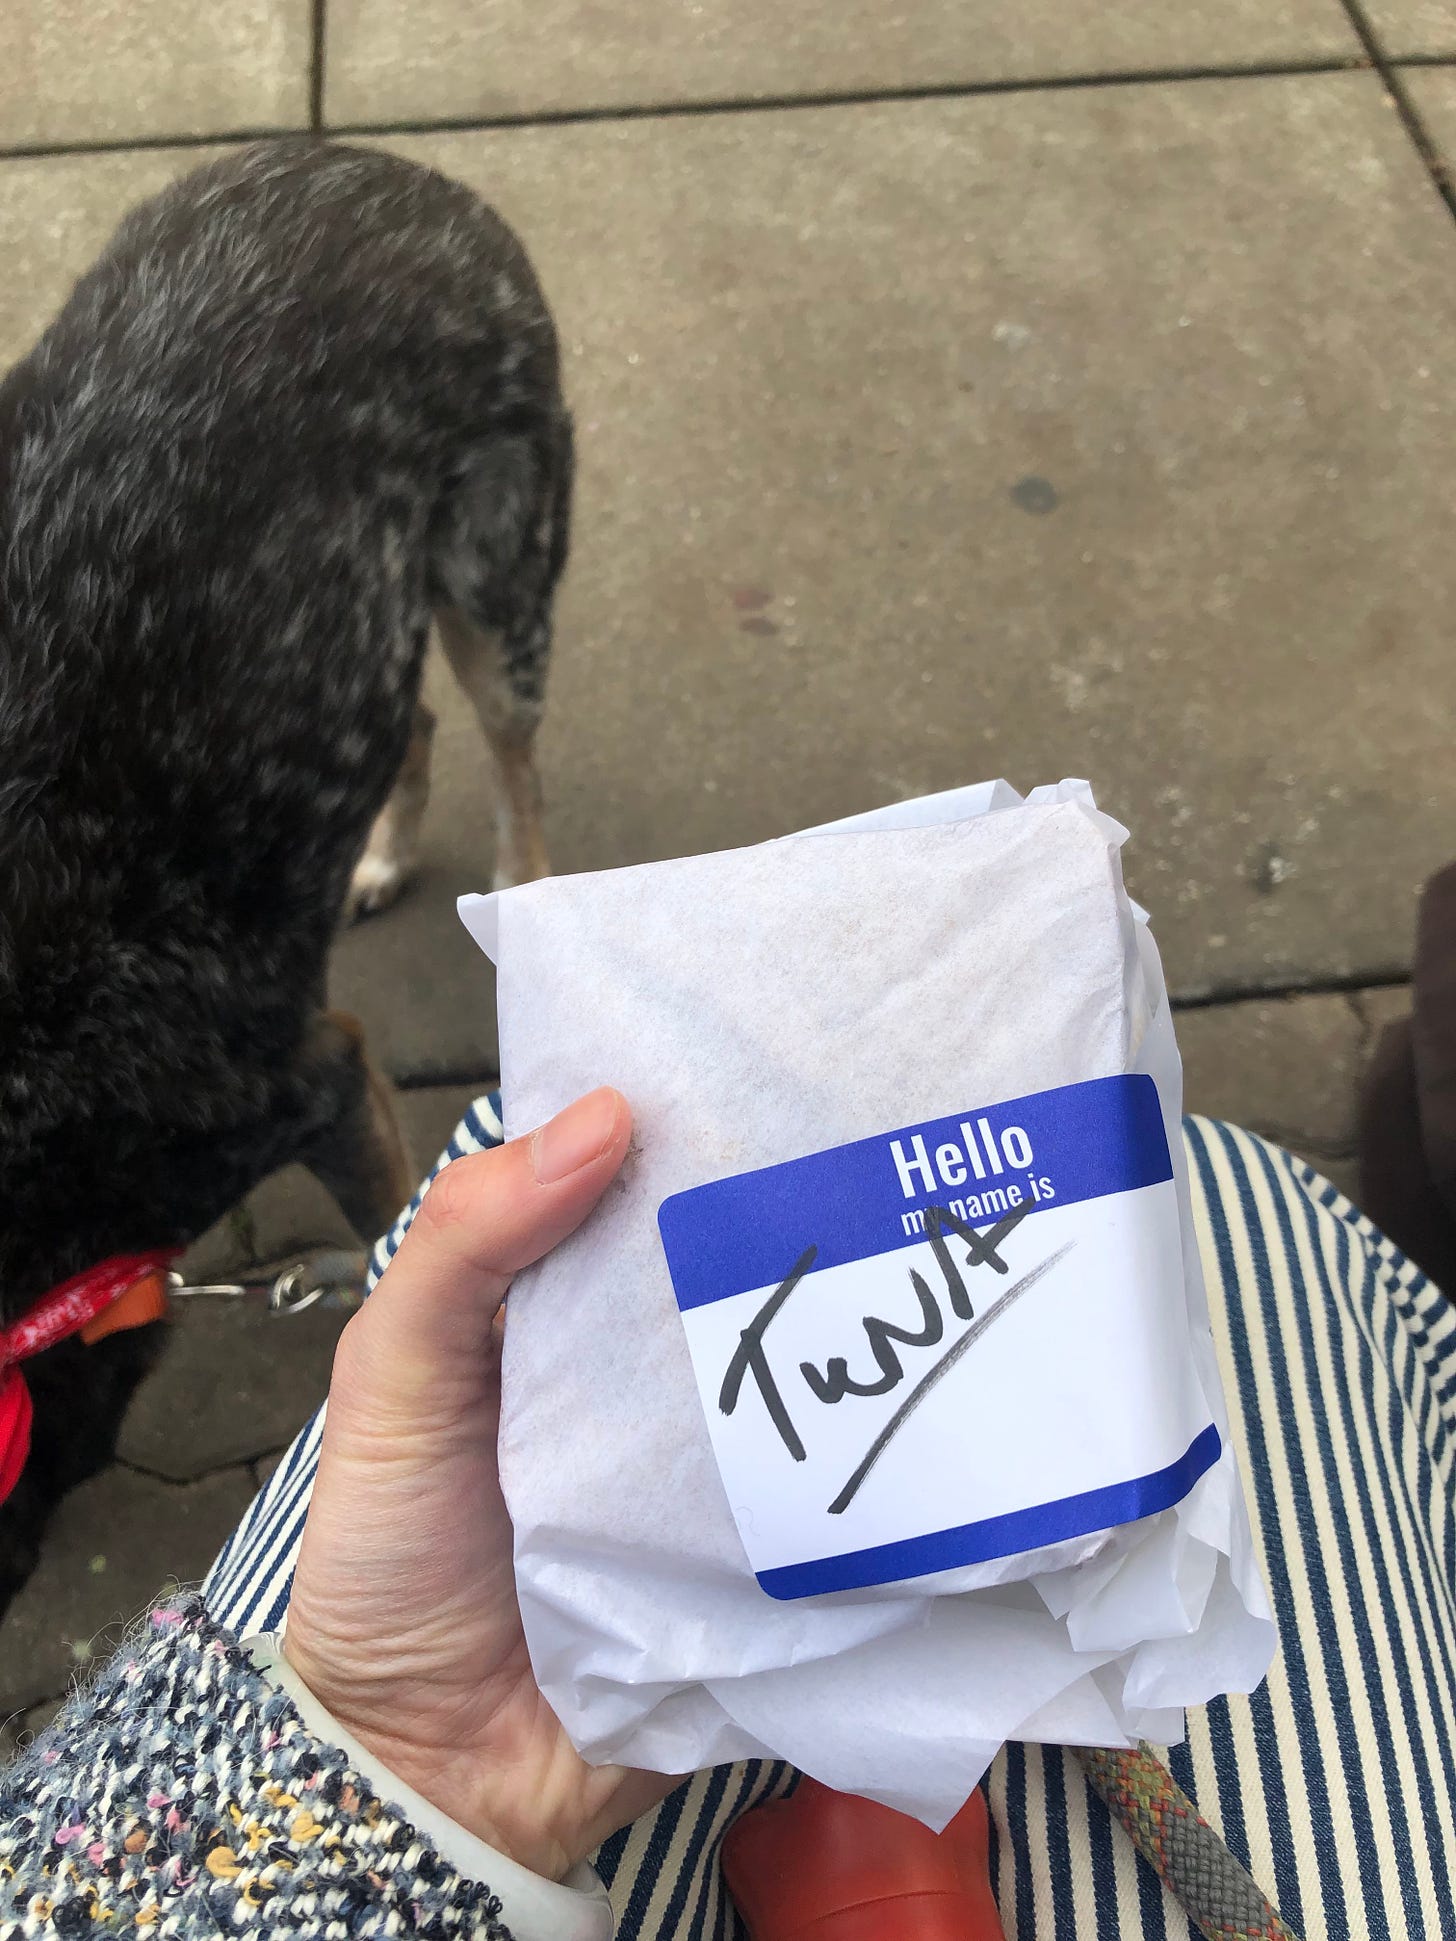 A hand holding a paper-wrapped sandwich with a label that reads "Hello my name is Tuna".